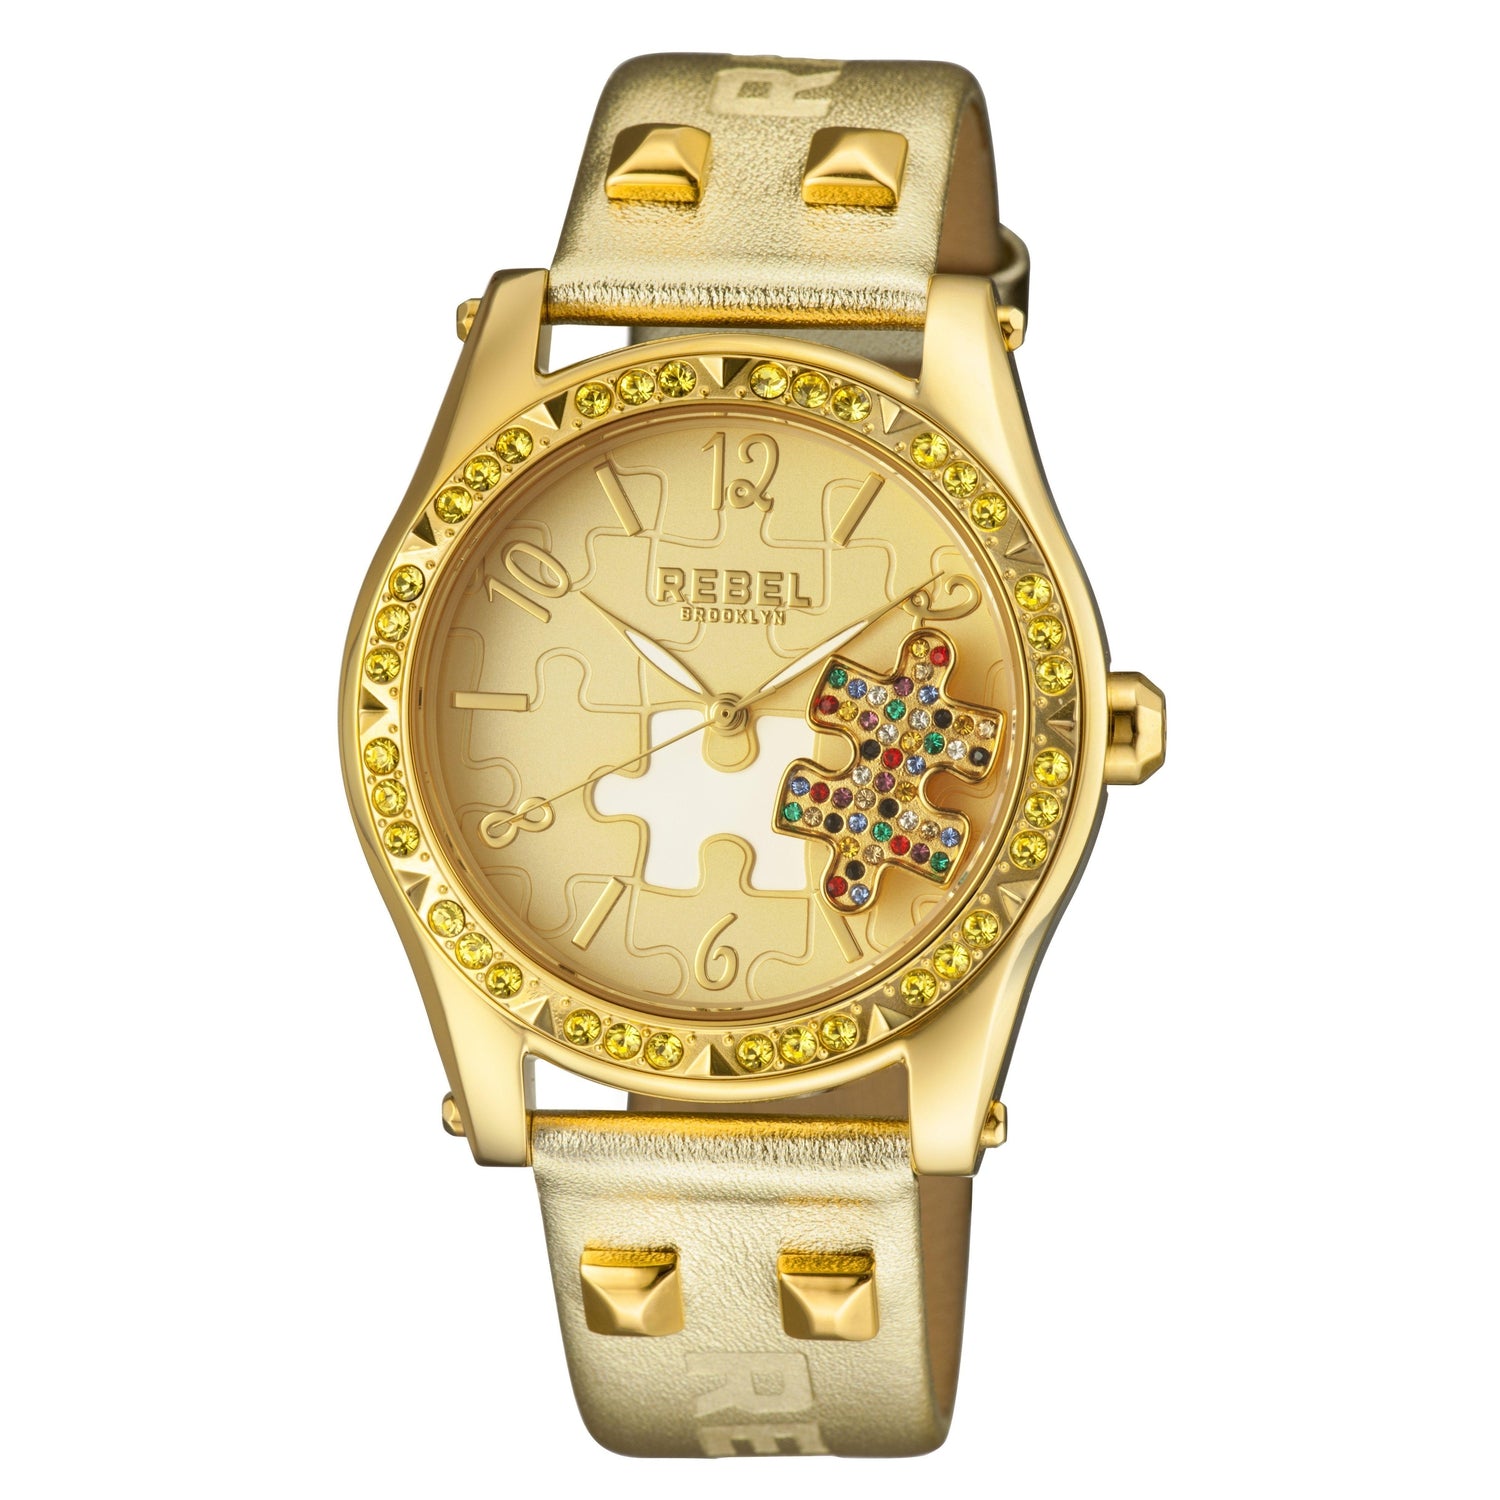 Gravesend Yellow Gold Dial Women's Watch-Rebel Brooklyn Watches - RB111-9101 - 